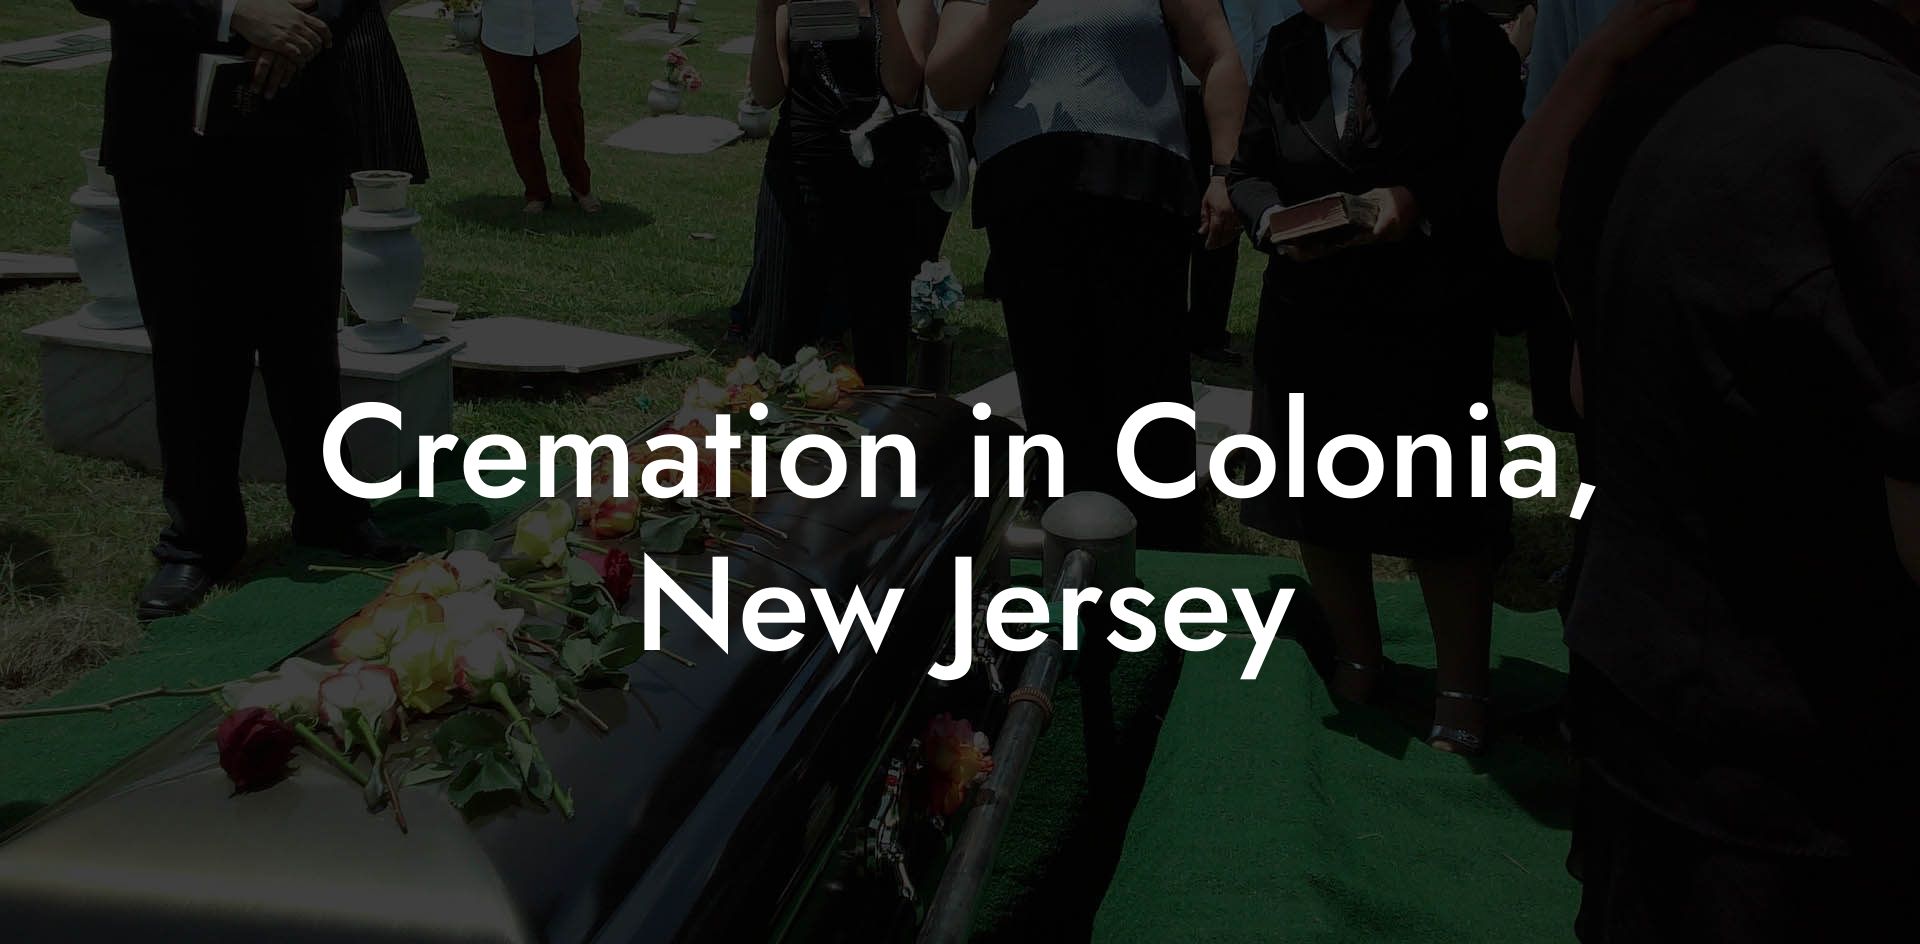 Cremation in Colonia, New Jersey